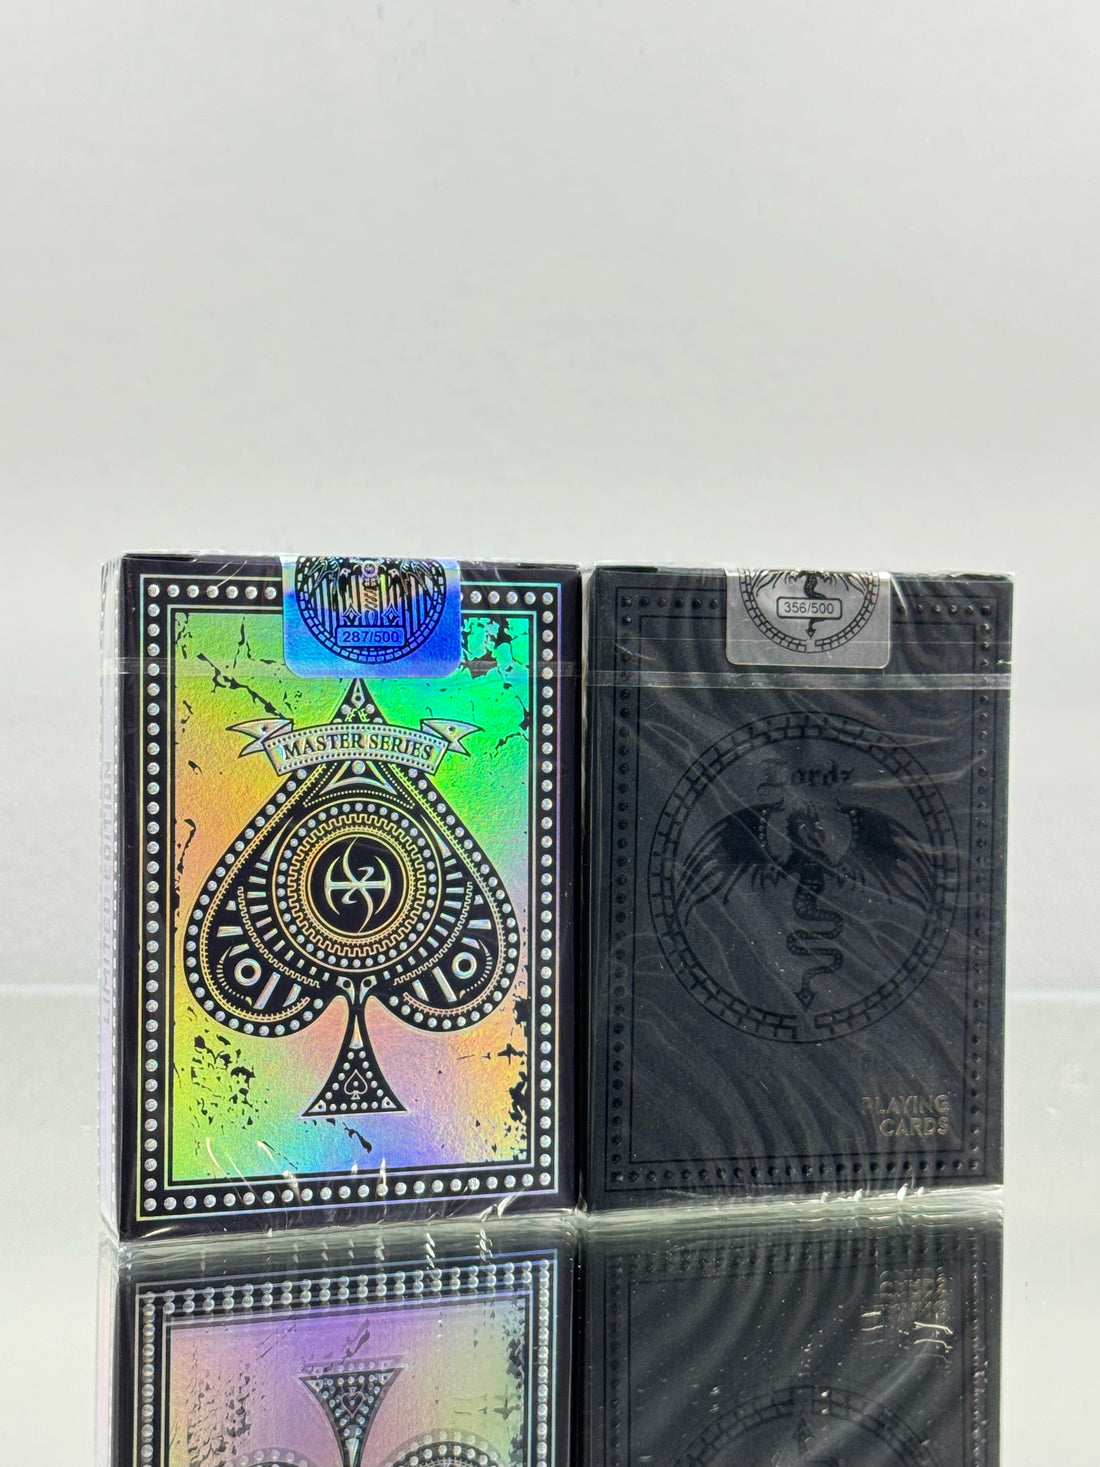 Lordz Twin Dragons Holographic Foil And Black Platinum With Black Foil Playing Cards Set By De&